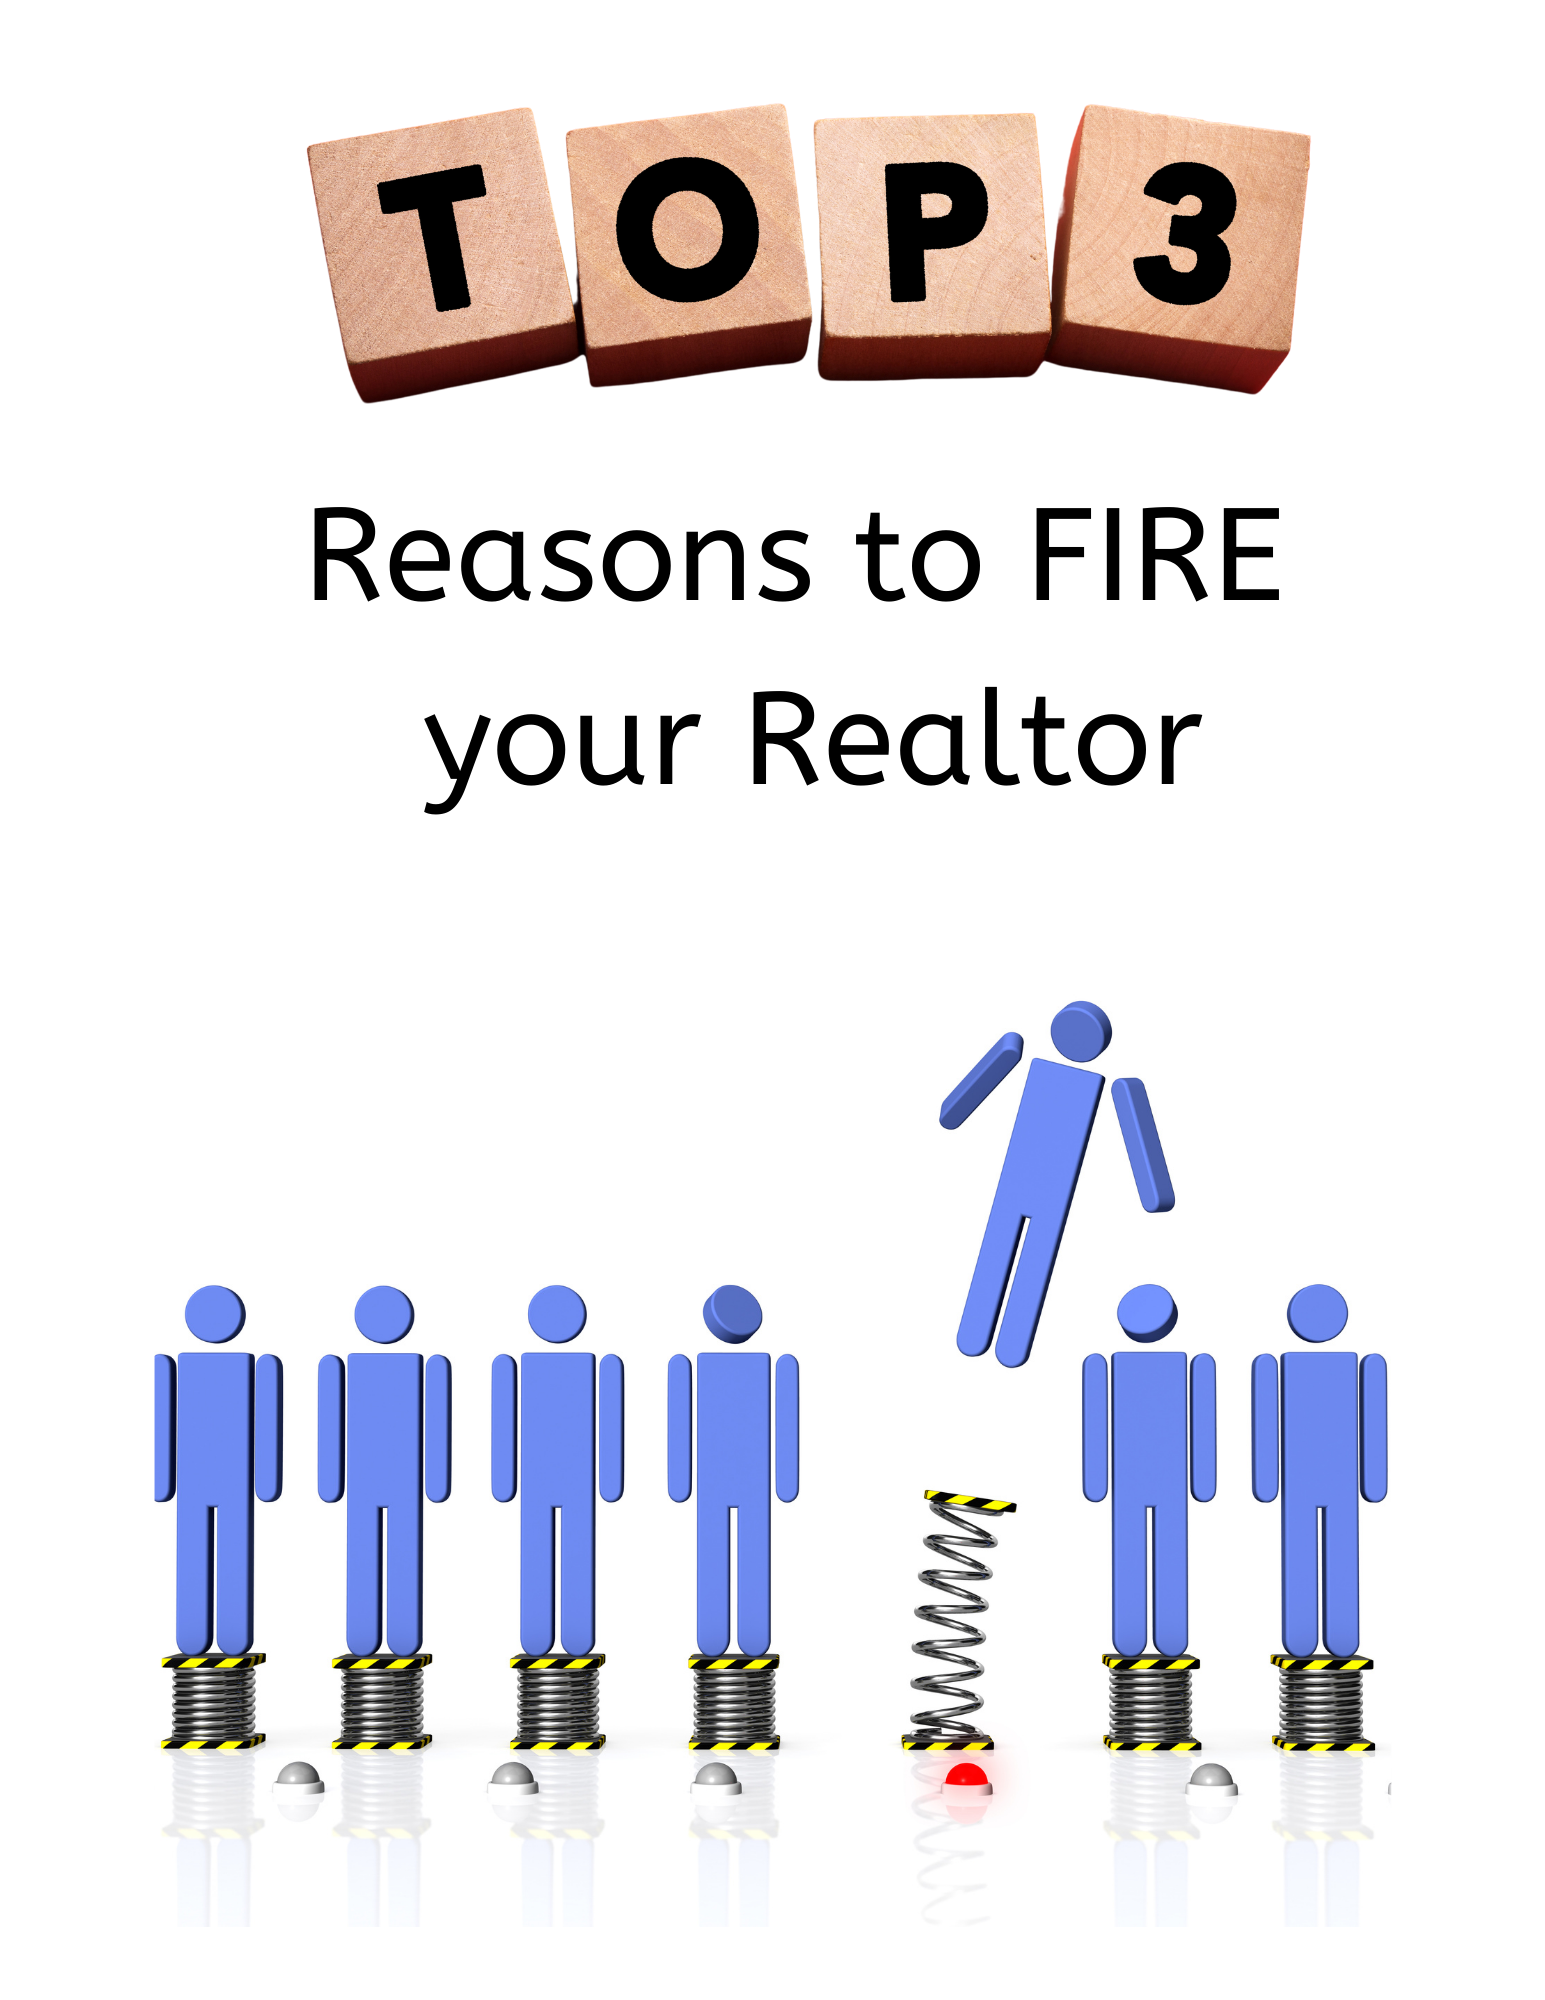 Top 3 reasons to fire your current realtor?